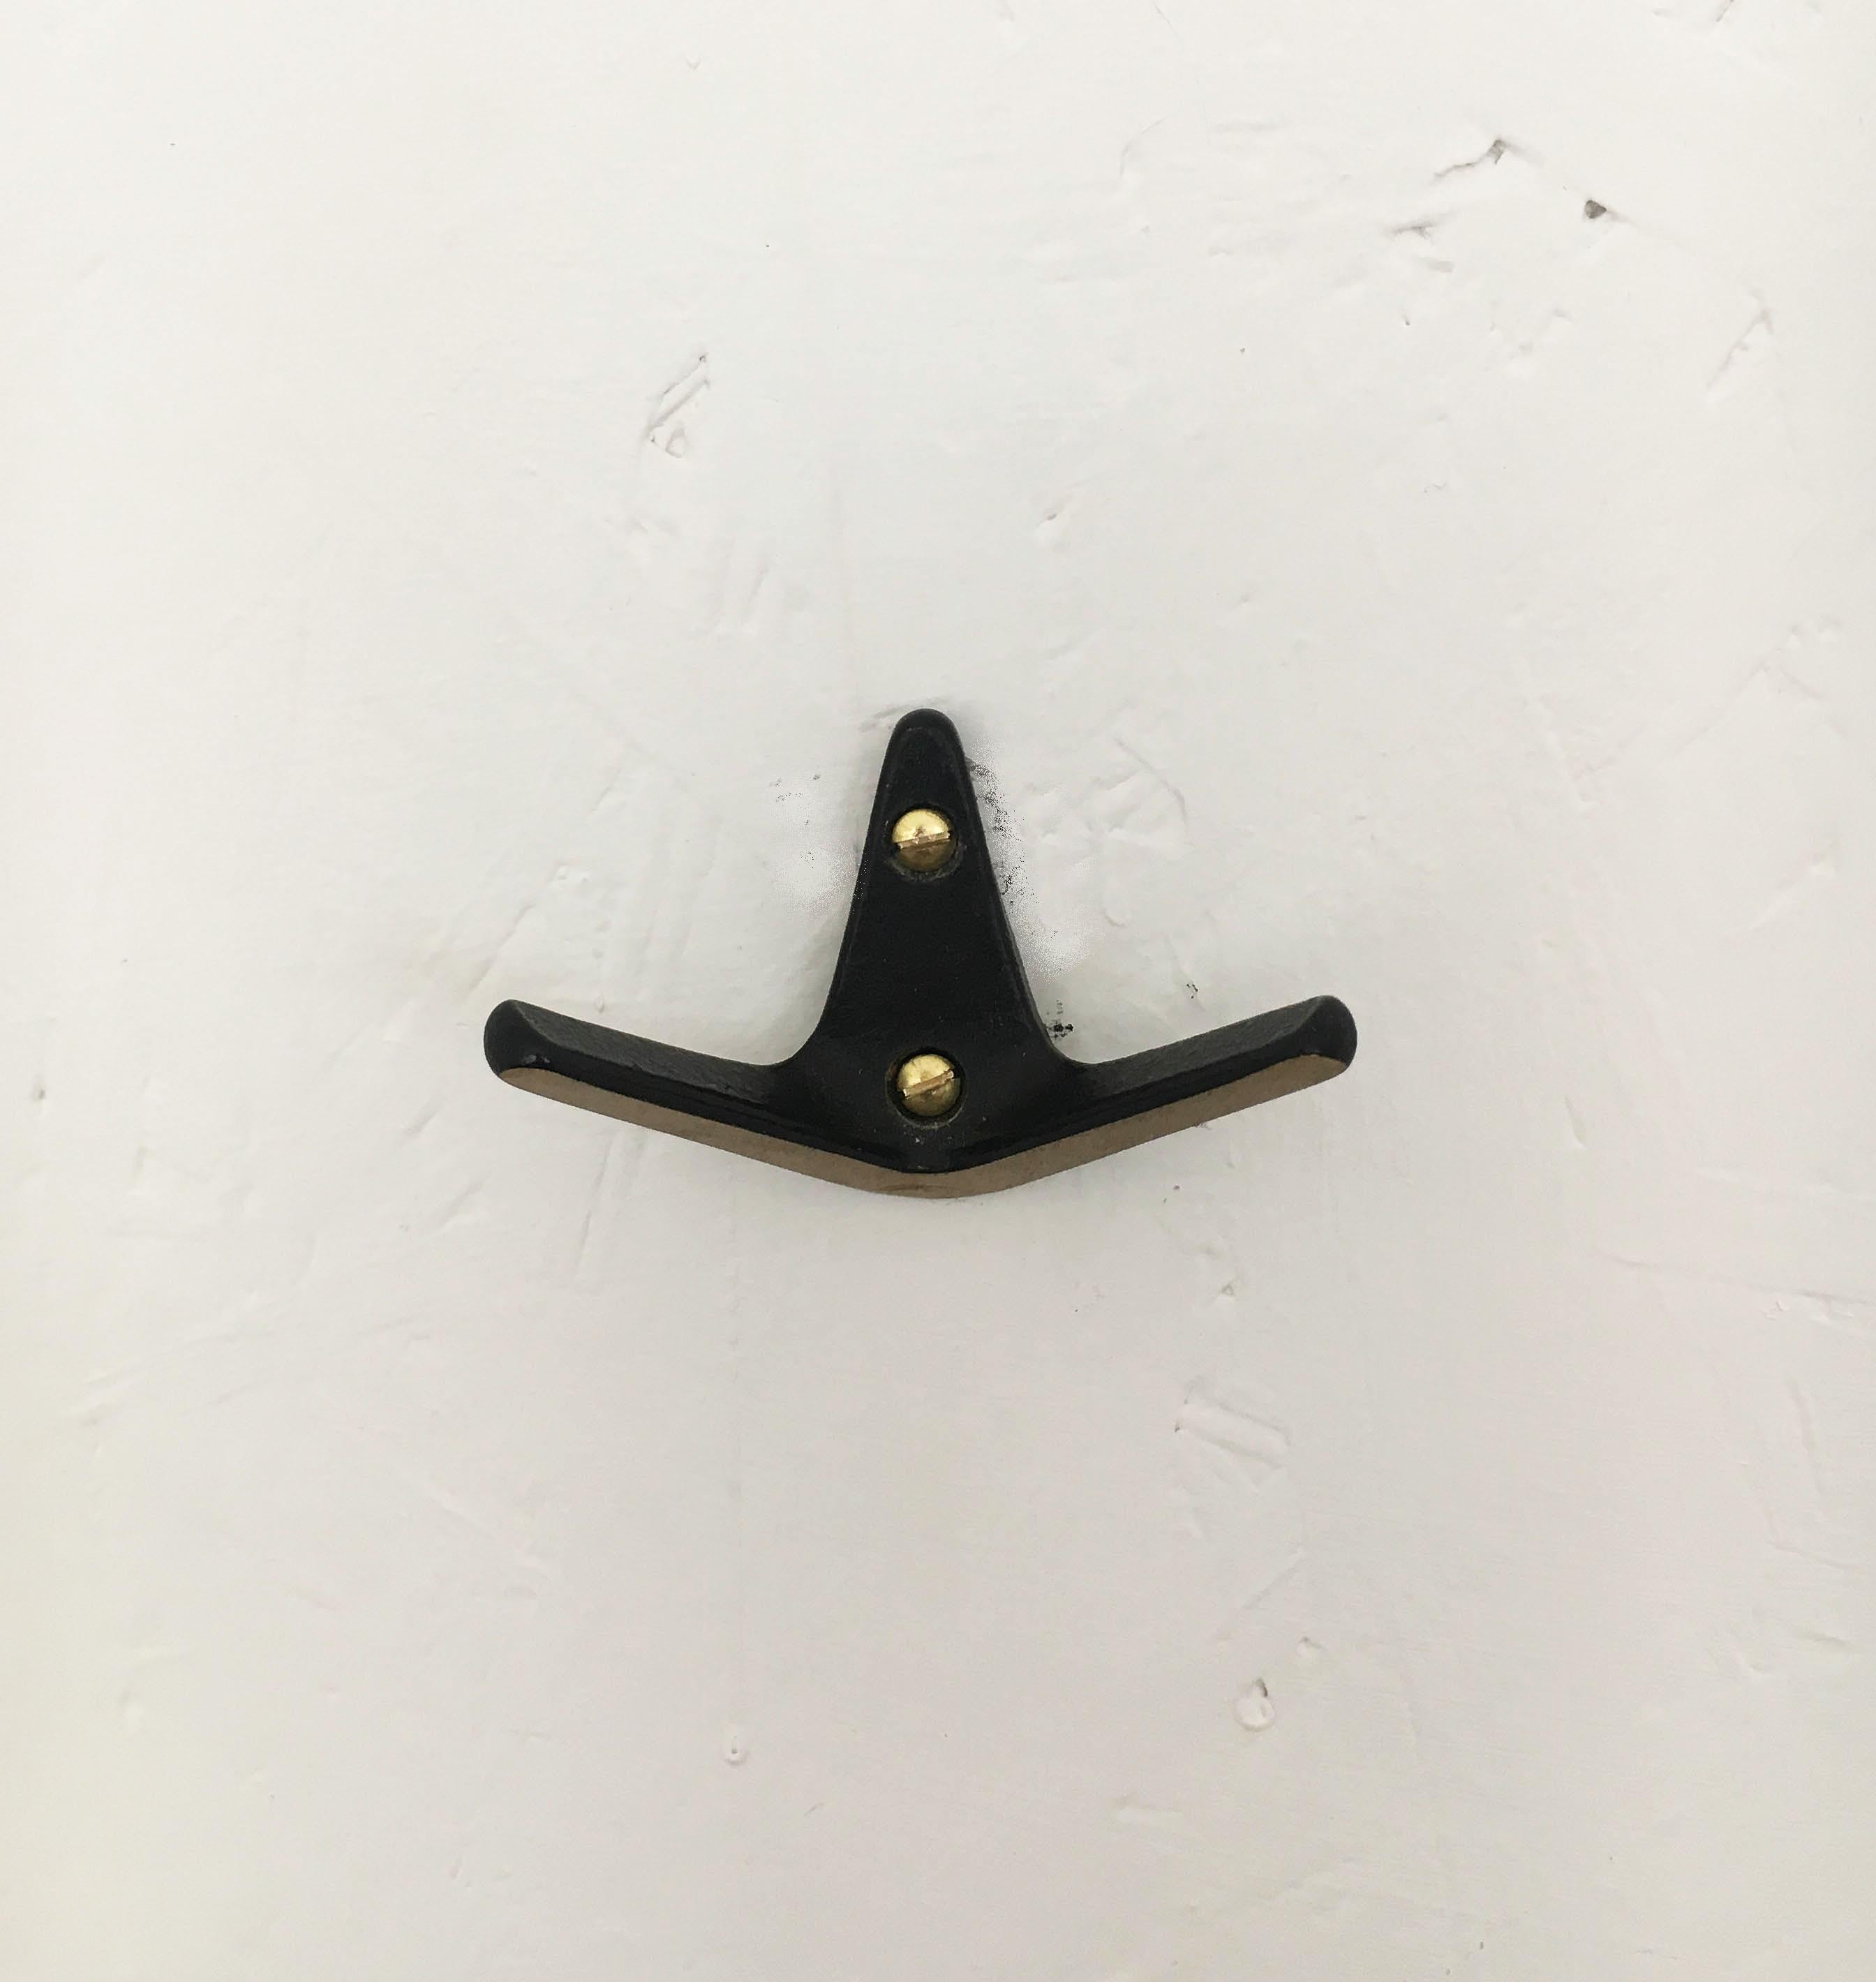 Hertha Baller Blackened Brass Wall Hooks Model 'Döbling'. Beautiful Austrian modernist brass wall hooks, executed in the 1950s by Hertha Baller, Austria. Made of black finished and partly polished brass, very solid, in good condition with lovely